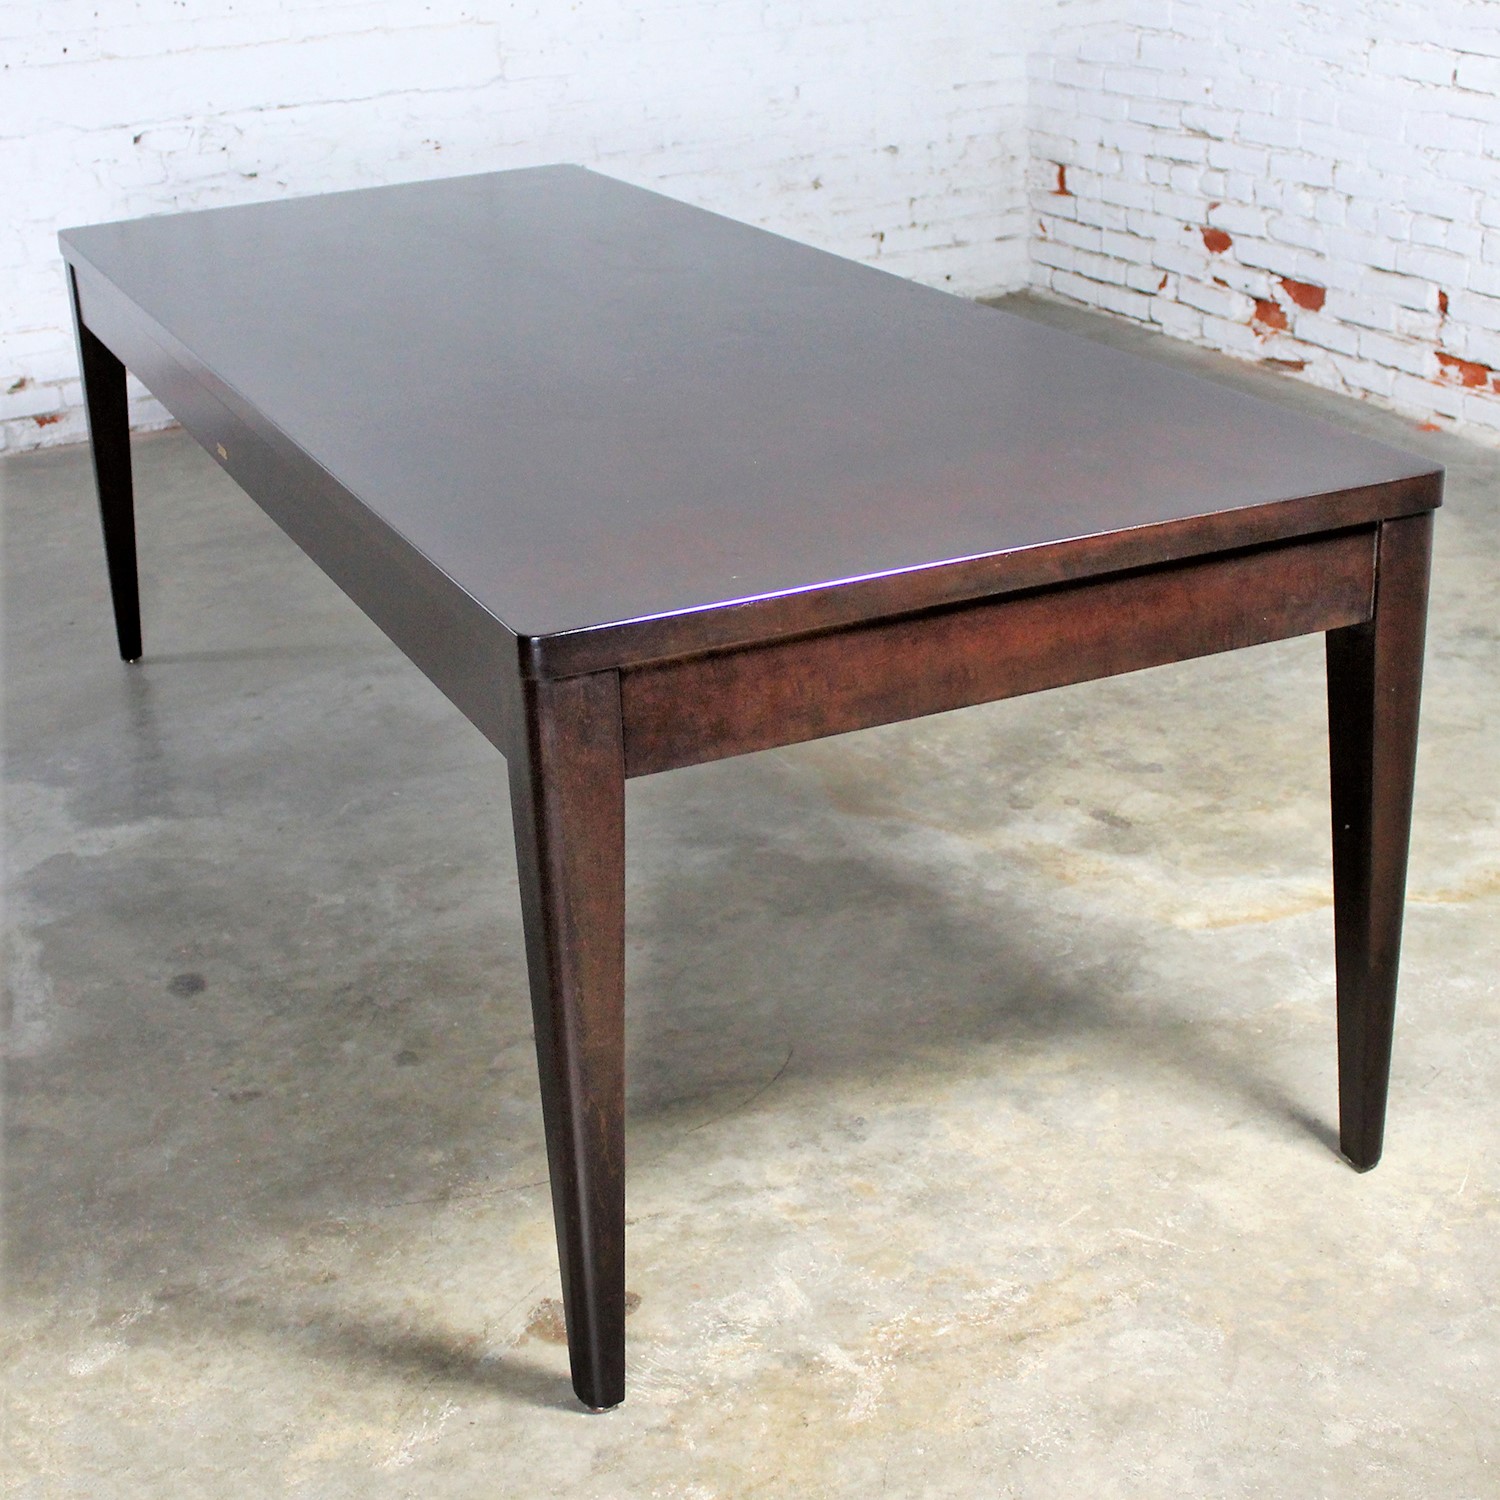 Library Style Dark Espresso Stained Maple Dining Table Vintage Modern by Bro-Dart Industries